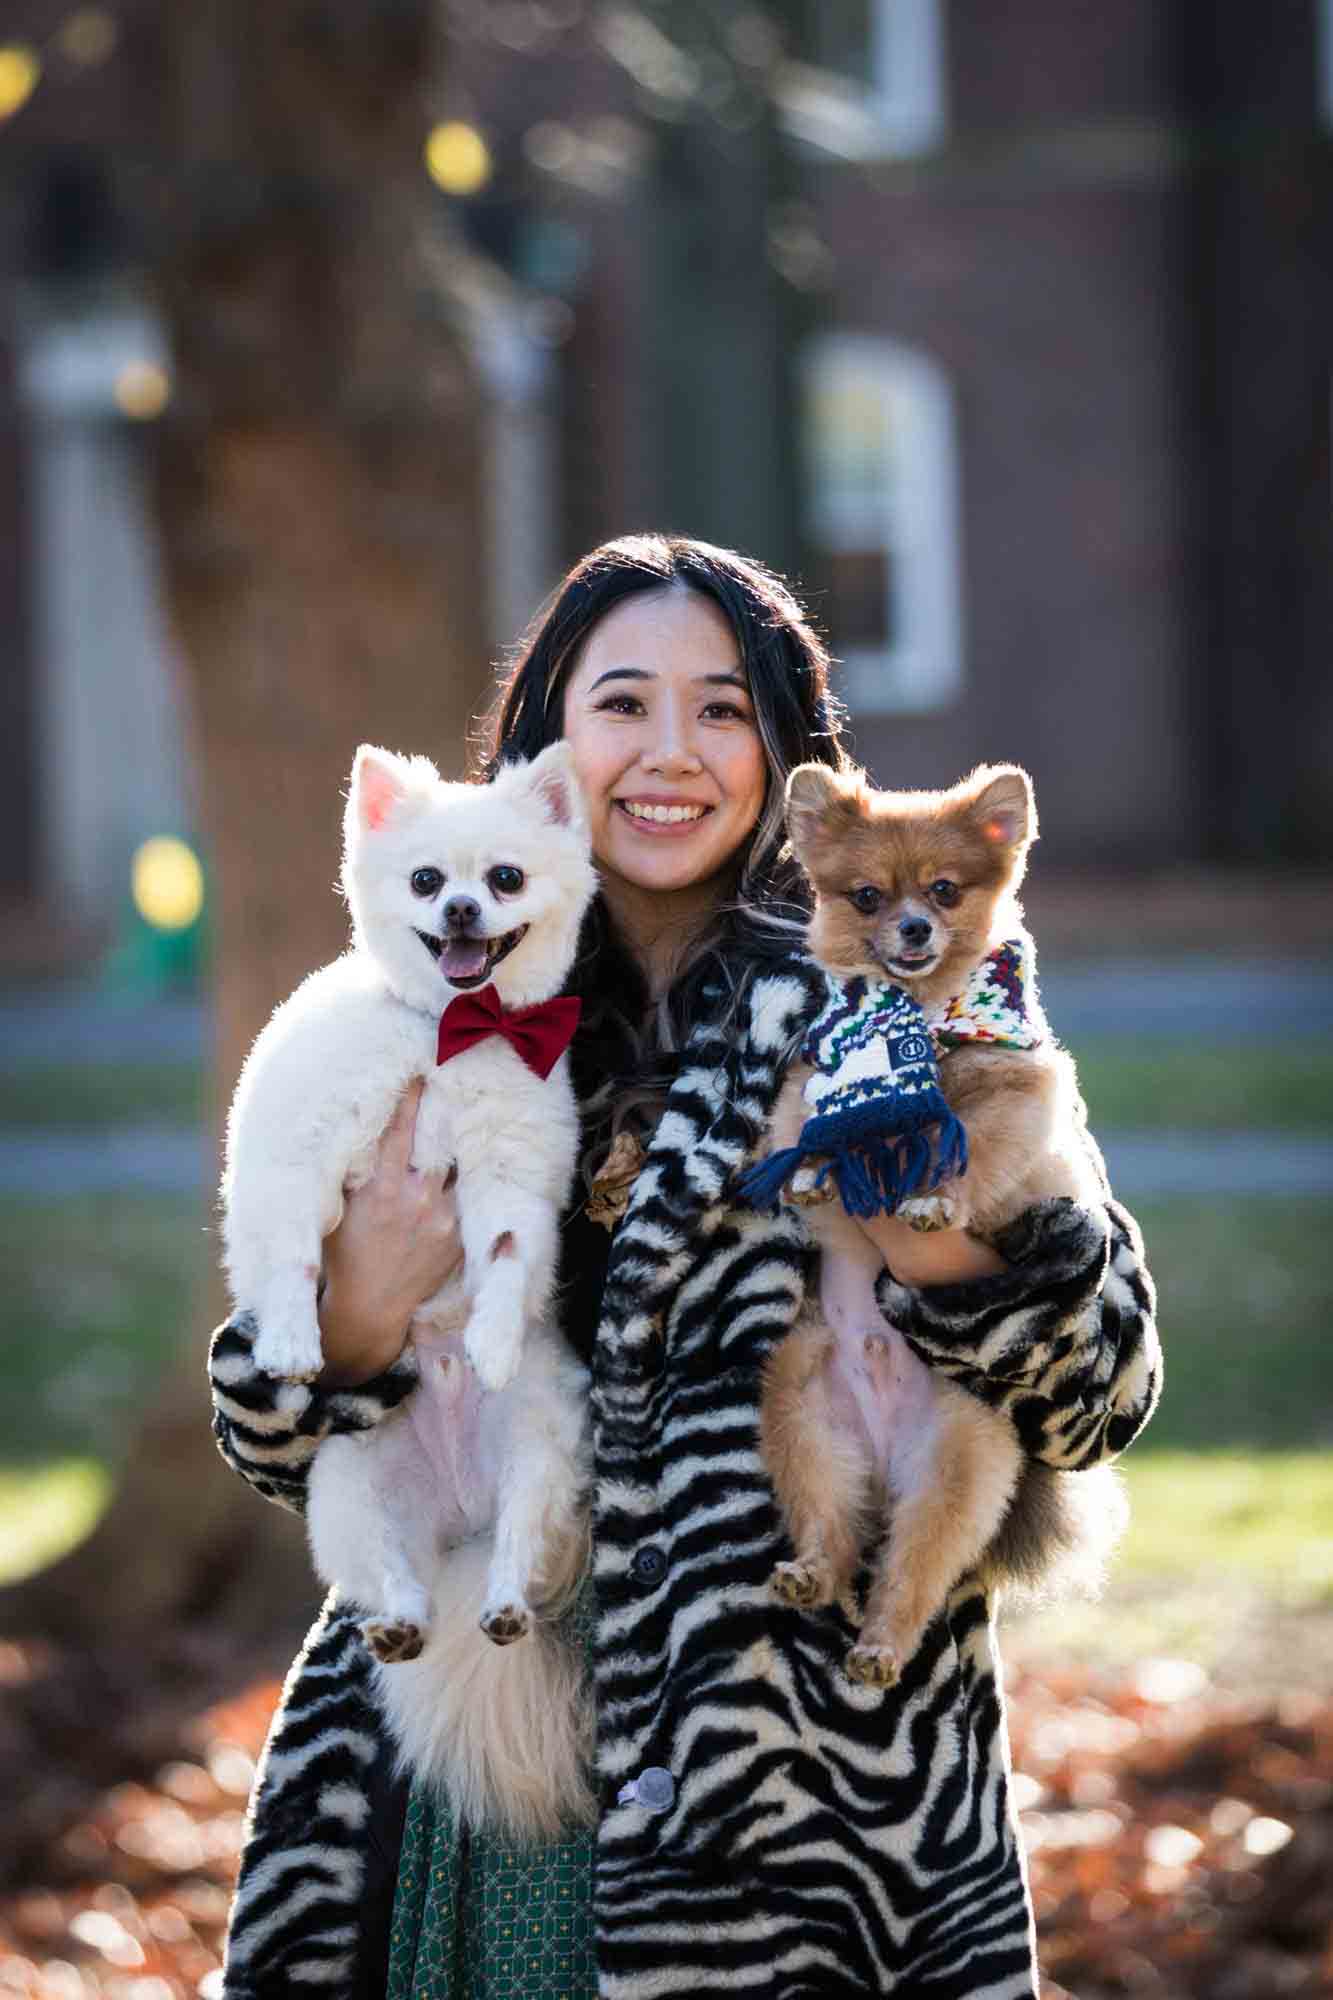 NYC pet portrait of woman holding two Pomeranian dogs and wearing zebra print coat